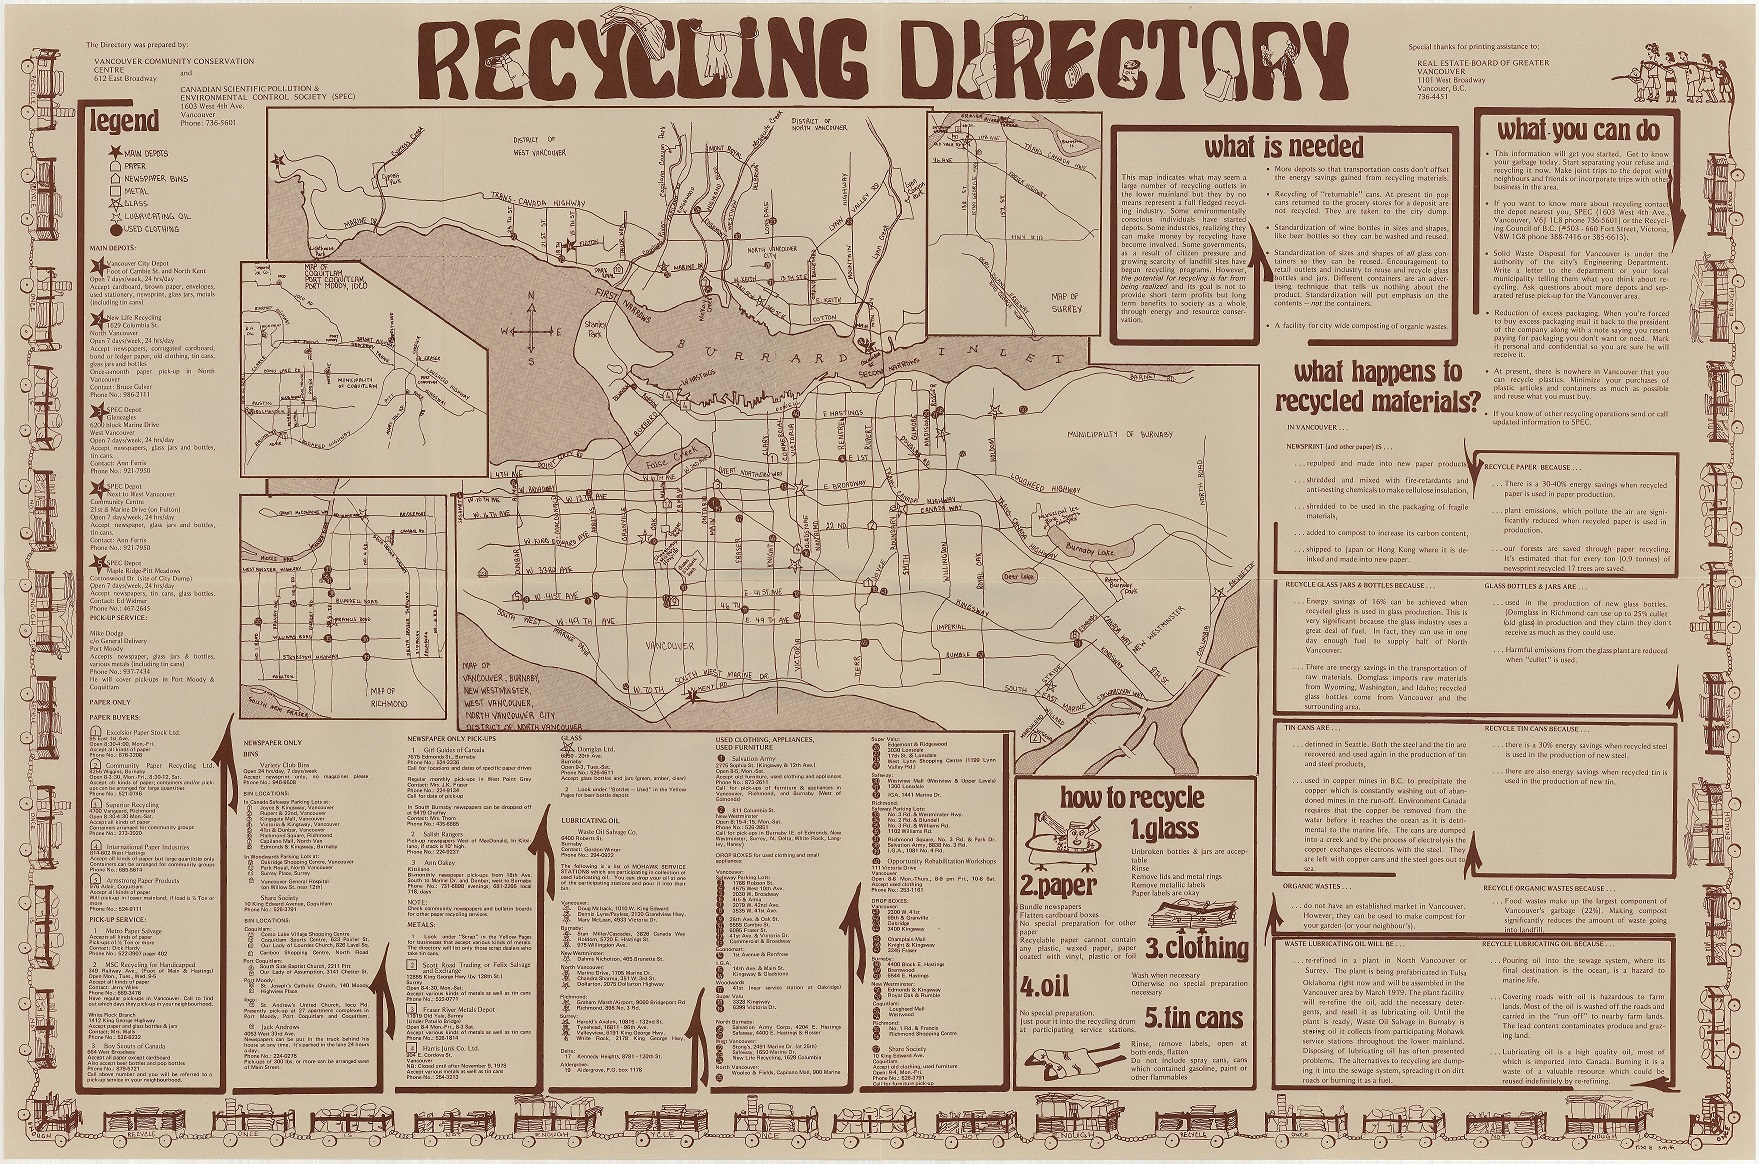 Recycling Directory map created by the Vancouver Community Conservation Centre and SPEC, 1976. Reference code: AM1556-S7--